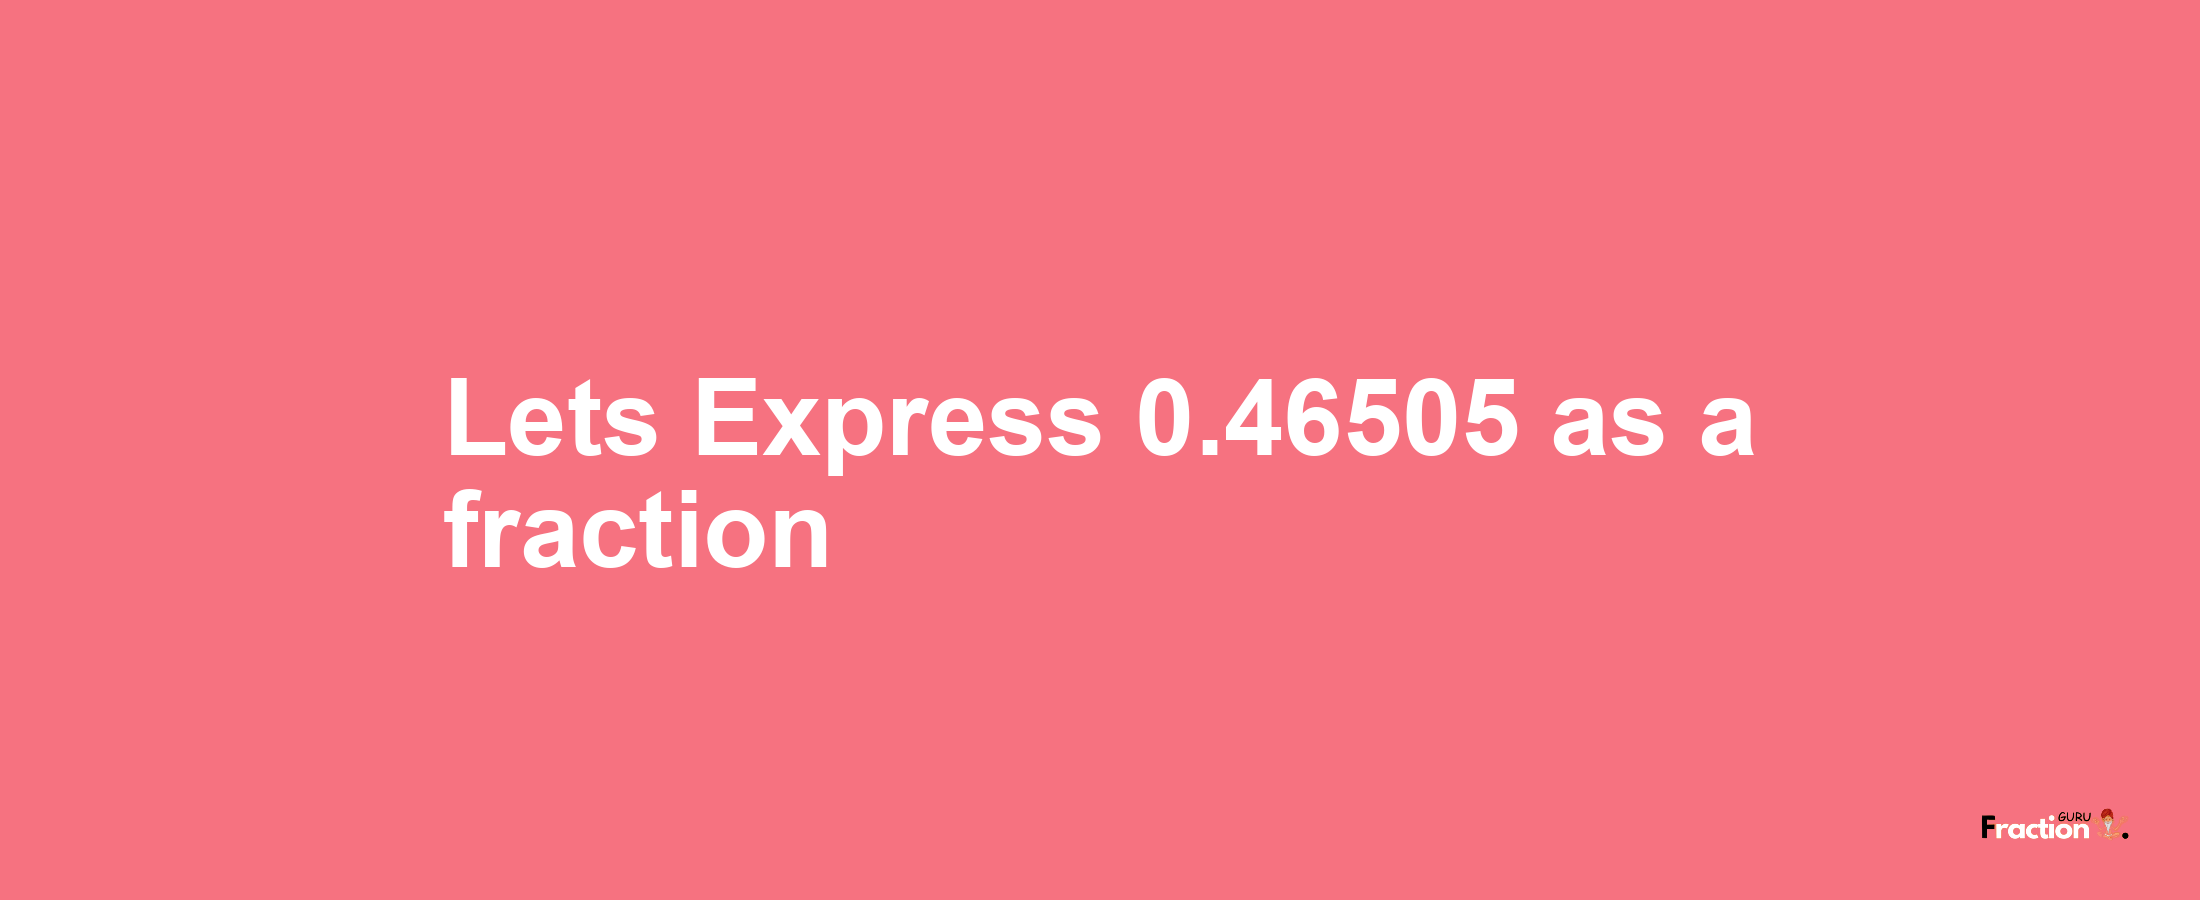 Lets Express 0.46505 as afraction